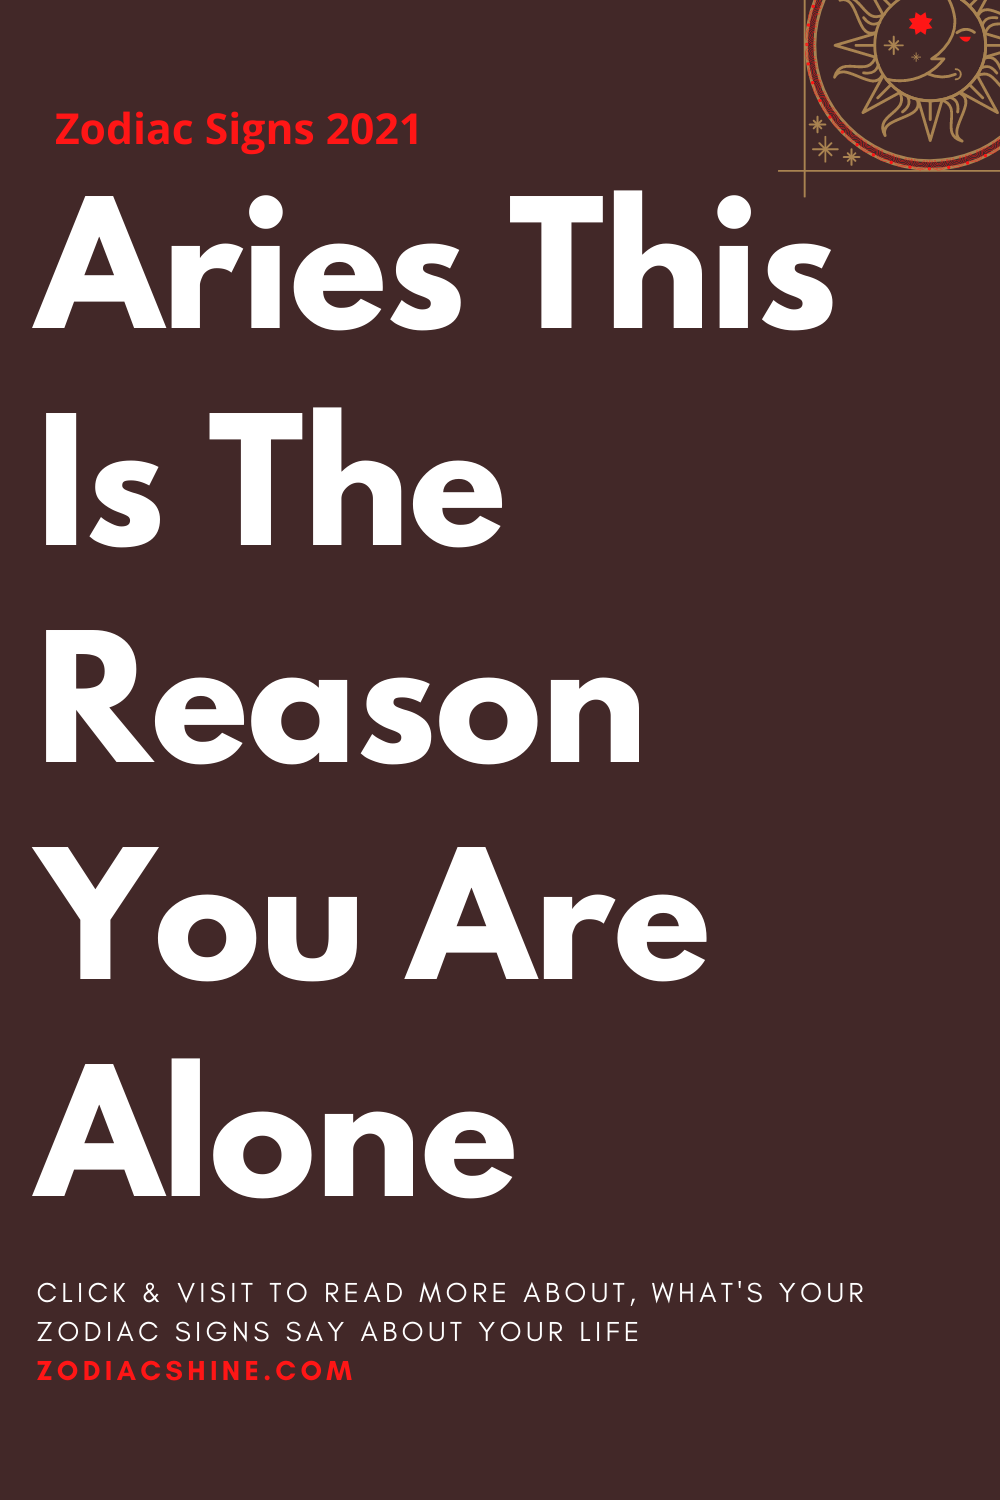 Aries This Is The Reason You Are Alone